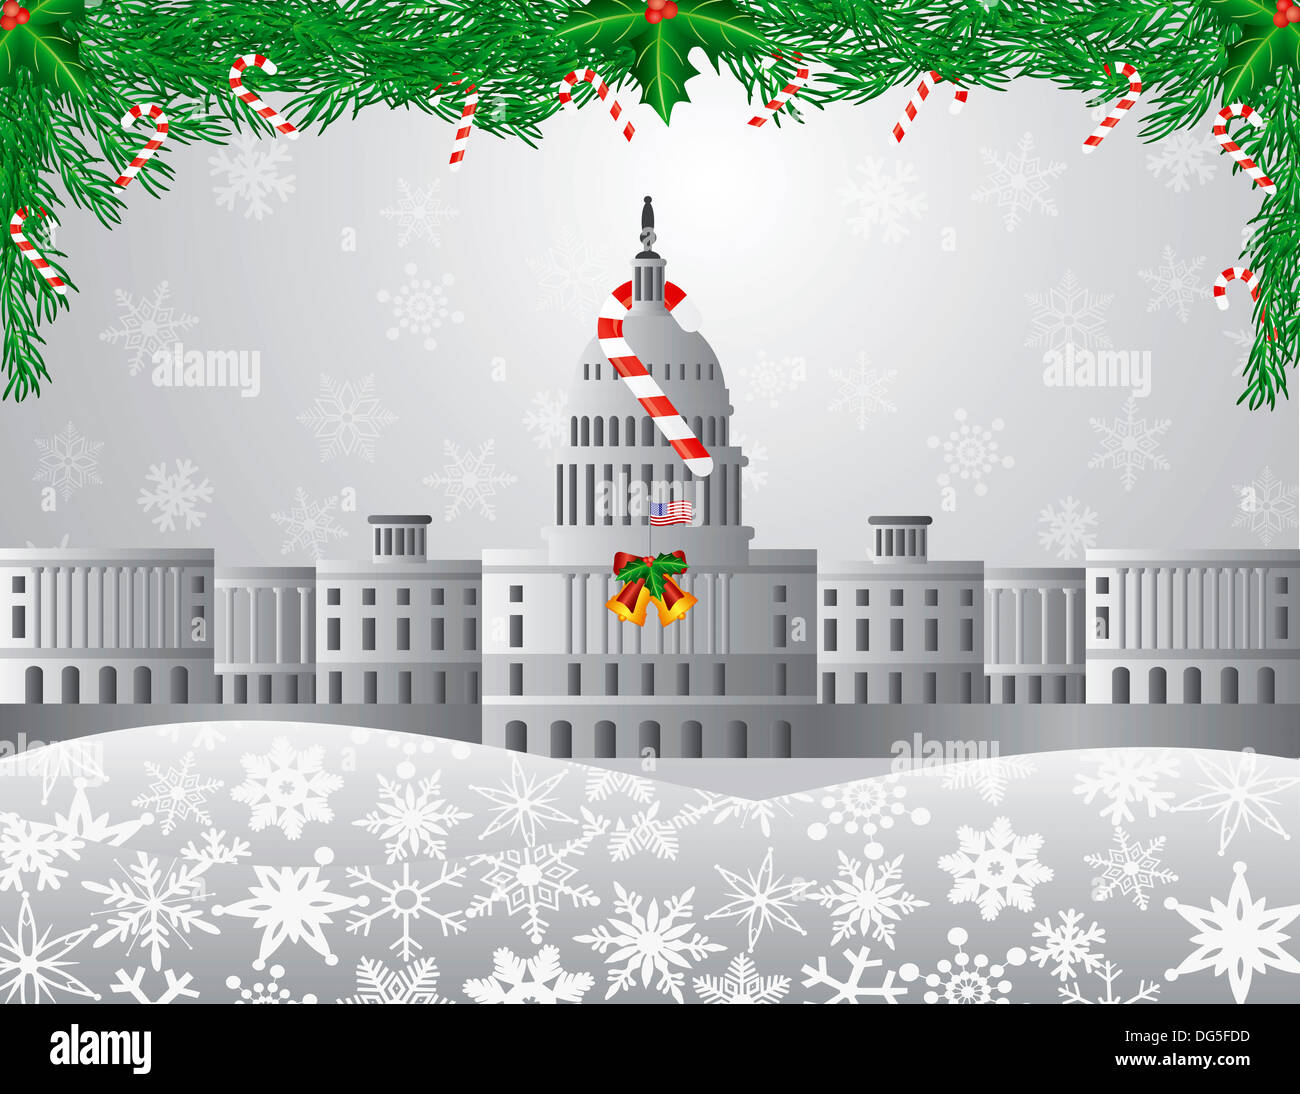 Washington DC Capitol Building with Garland Candy Cane Holly Berries on Snowflakes Background Illustration Stock Photo